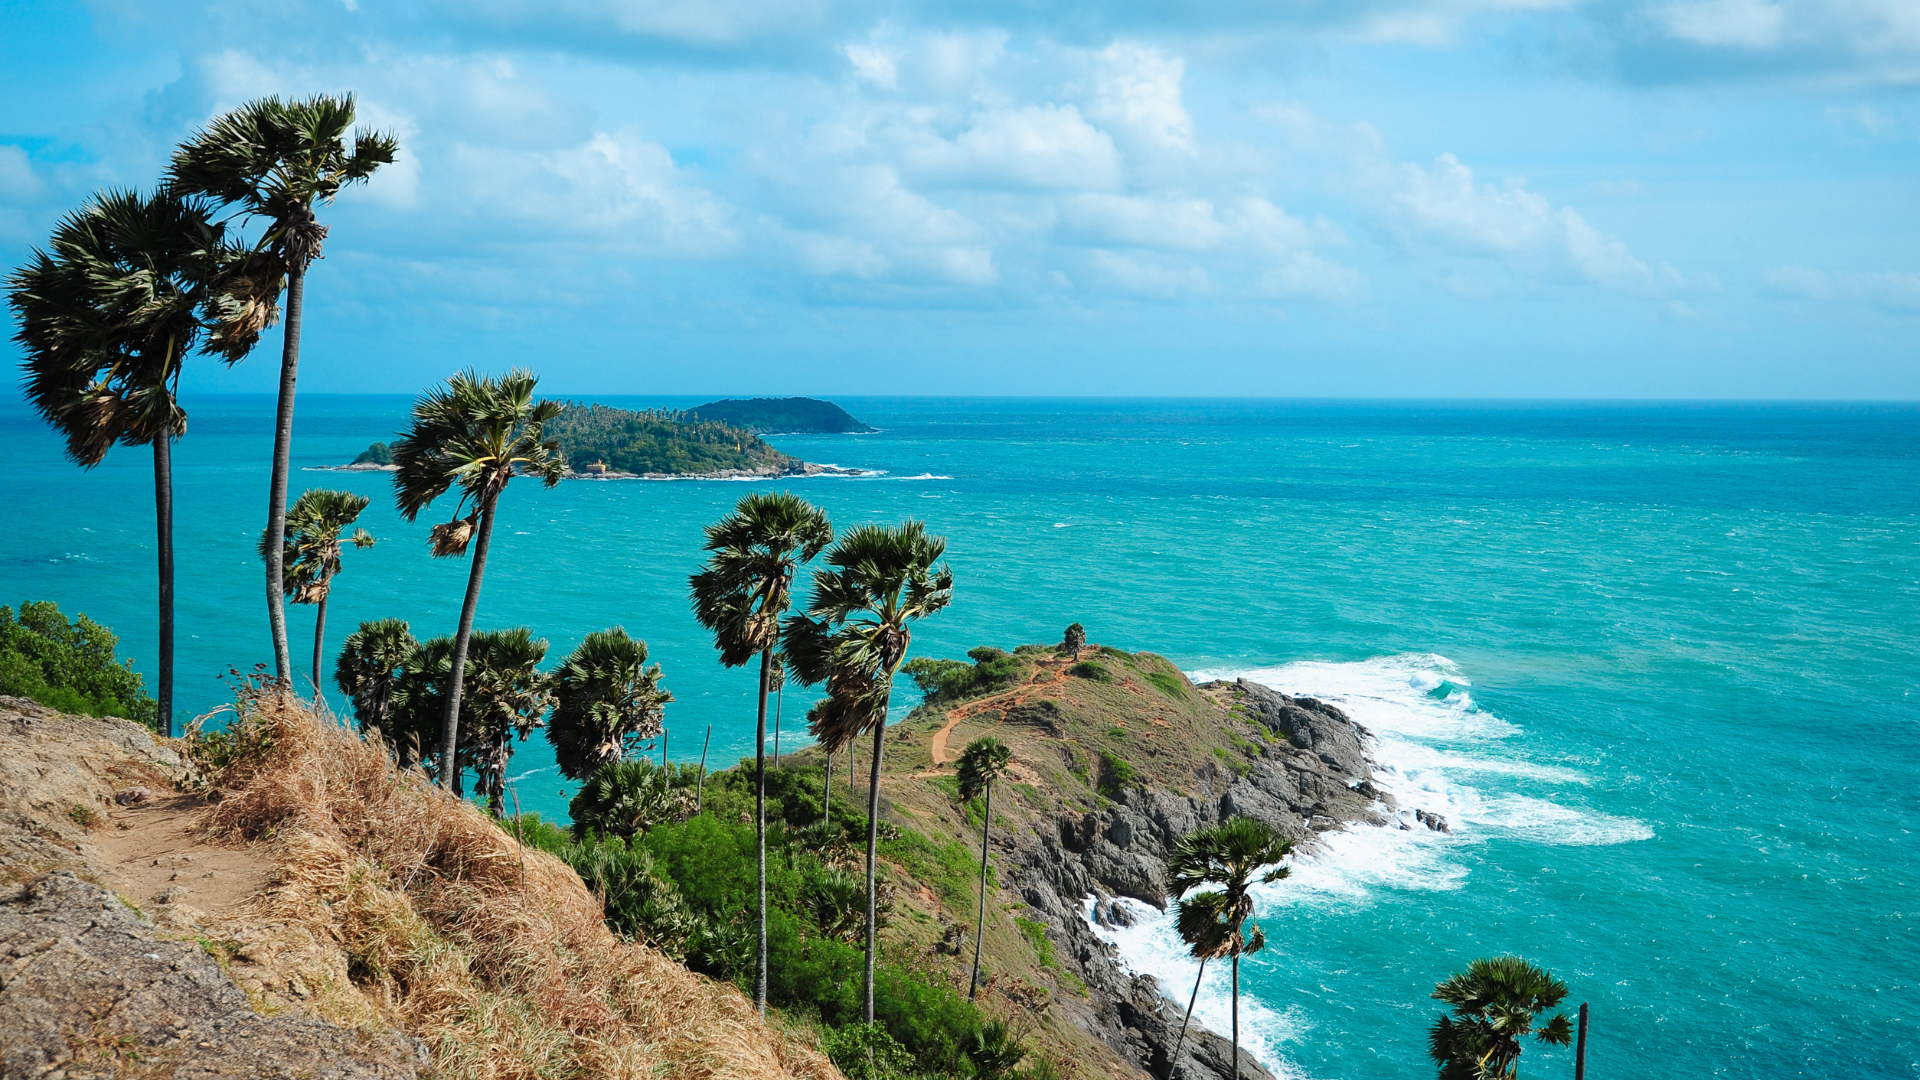 Best areas to buy in Phuket - Where is the best place to invest in Phuket property? - RealPhuket by Property Scout